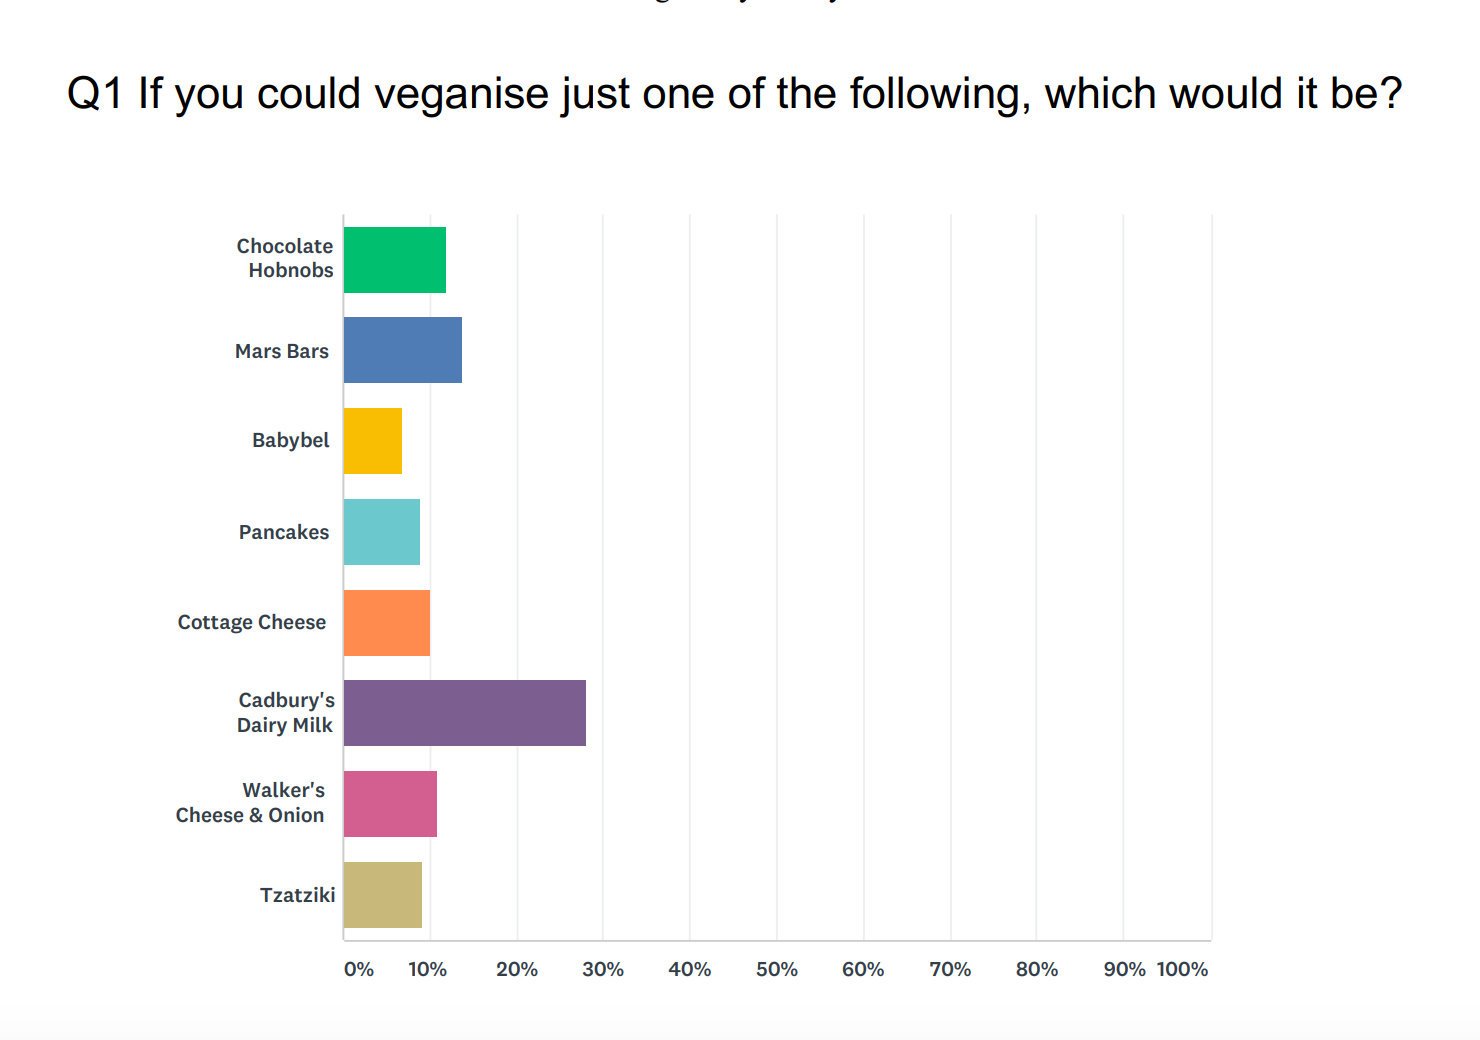 The results from Veganuary's 'If you could veganise anything, what would it be?' poll.